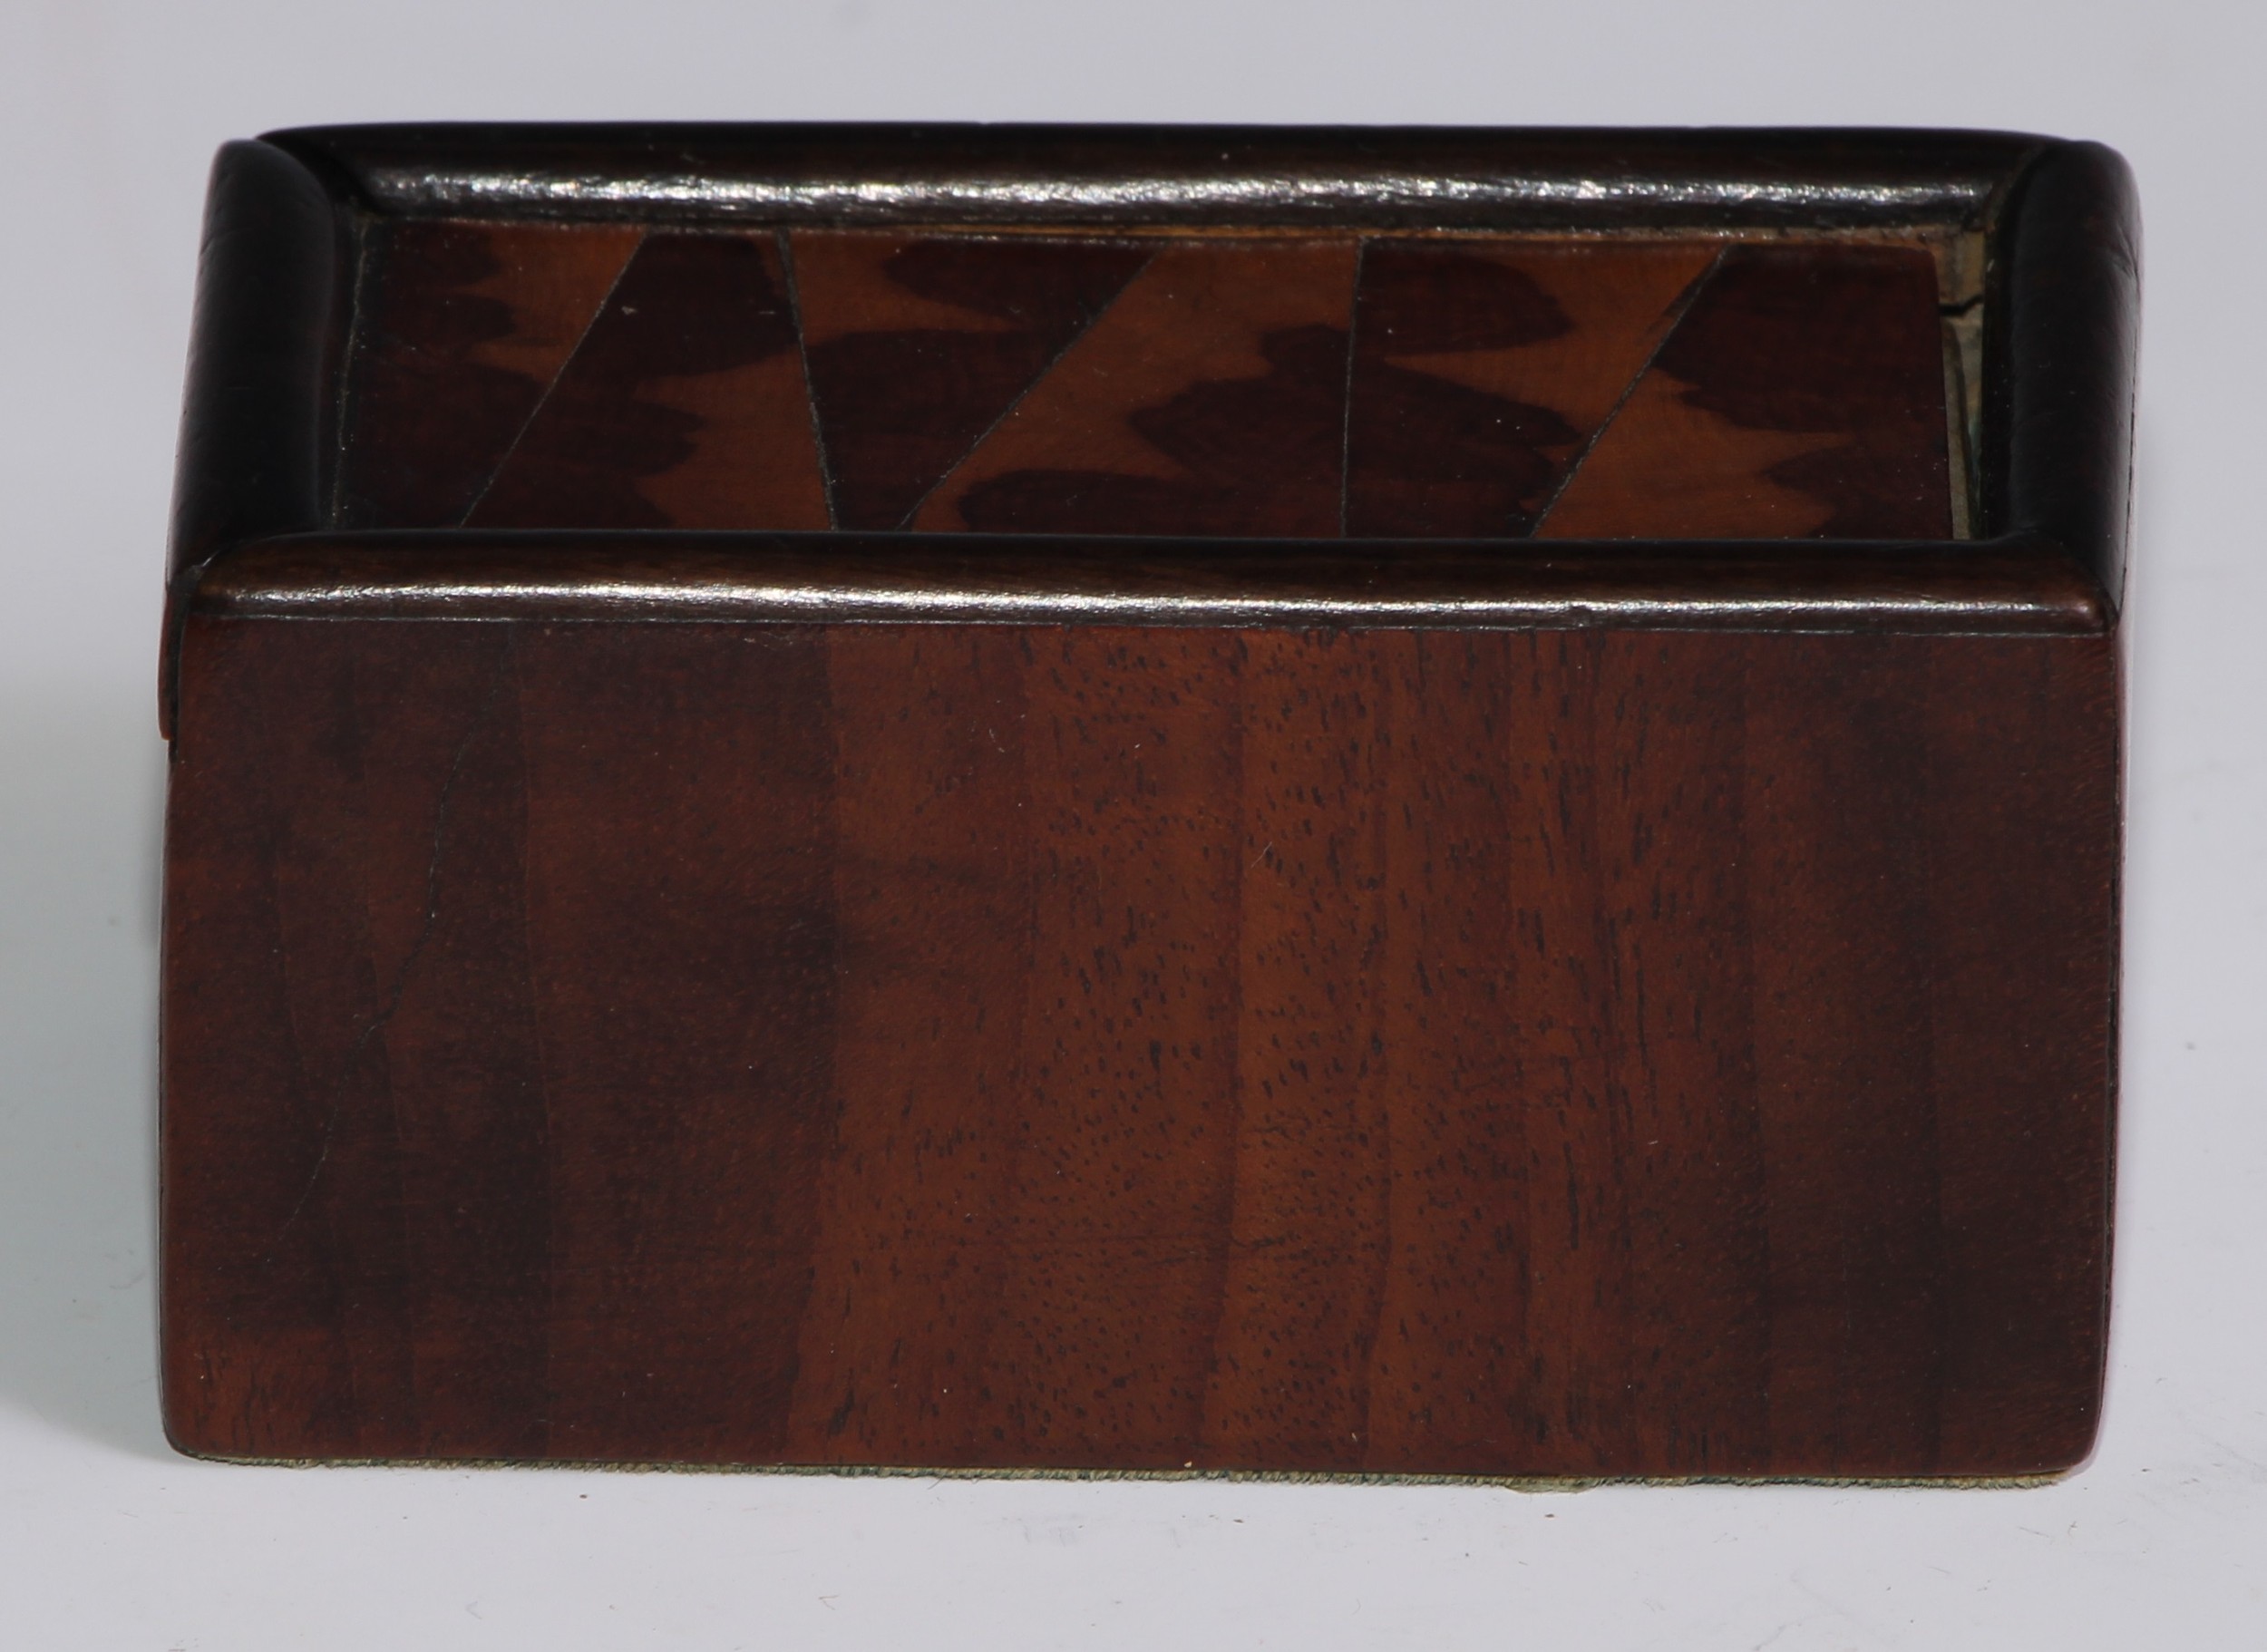 Treen - a George III mahogany, walnut and yew cotton box, sliding cover, 9cm wide, c.1790